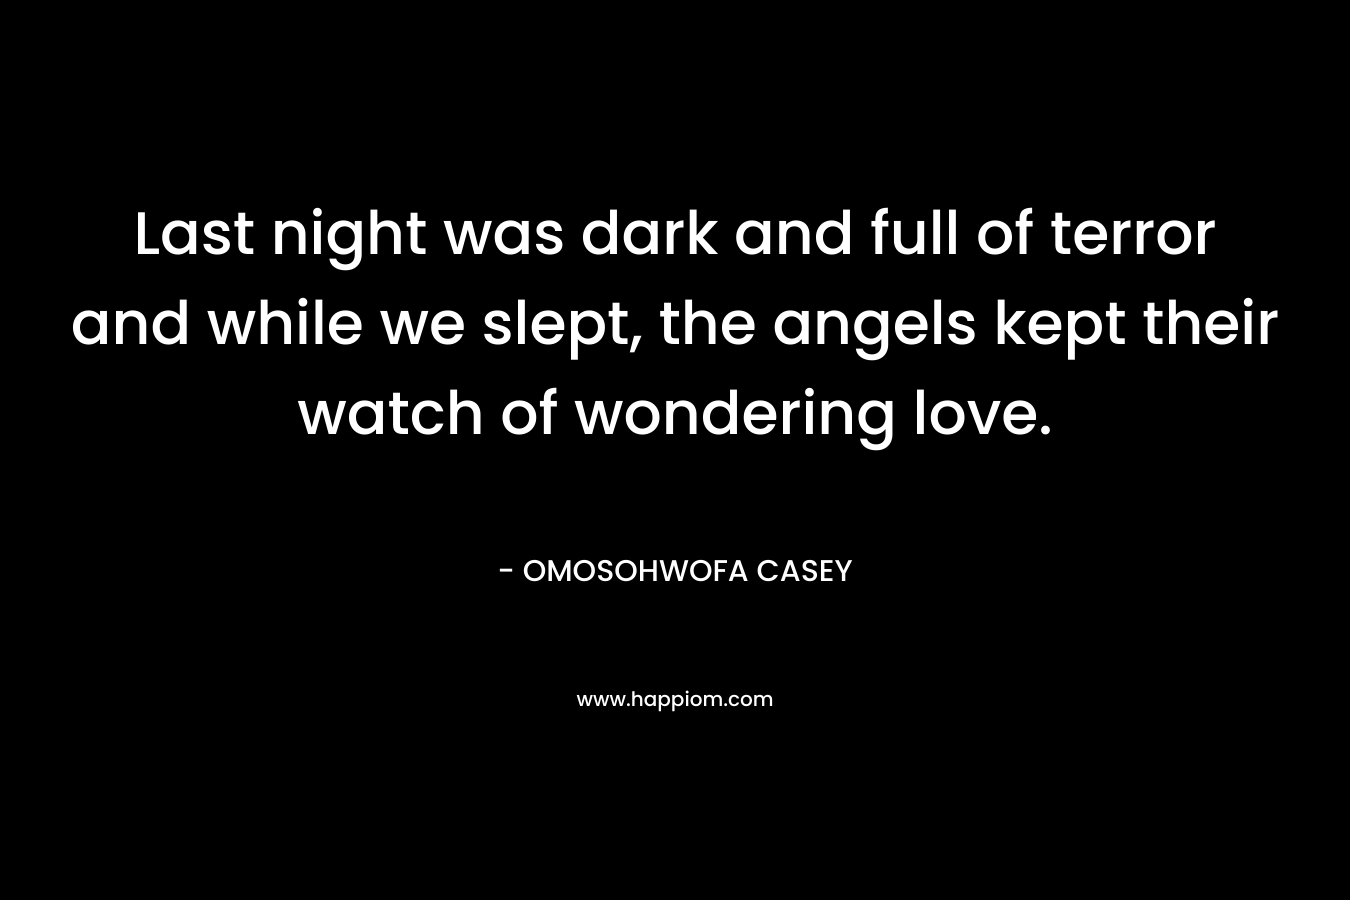 Last night was dark and full of terror and while we slept, the angels kept their watch of wondering love. – OMOSOHWOFA CASEY